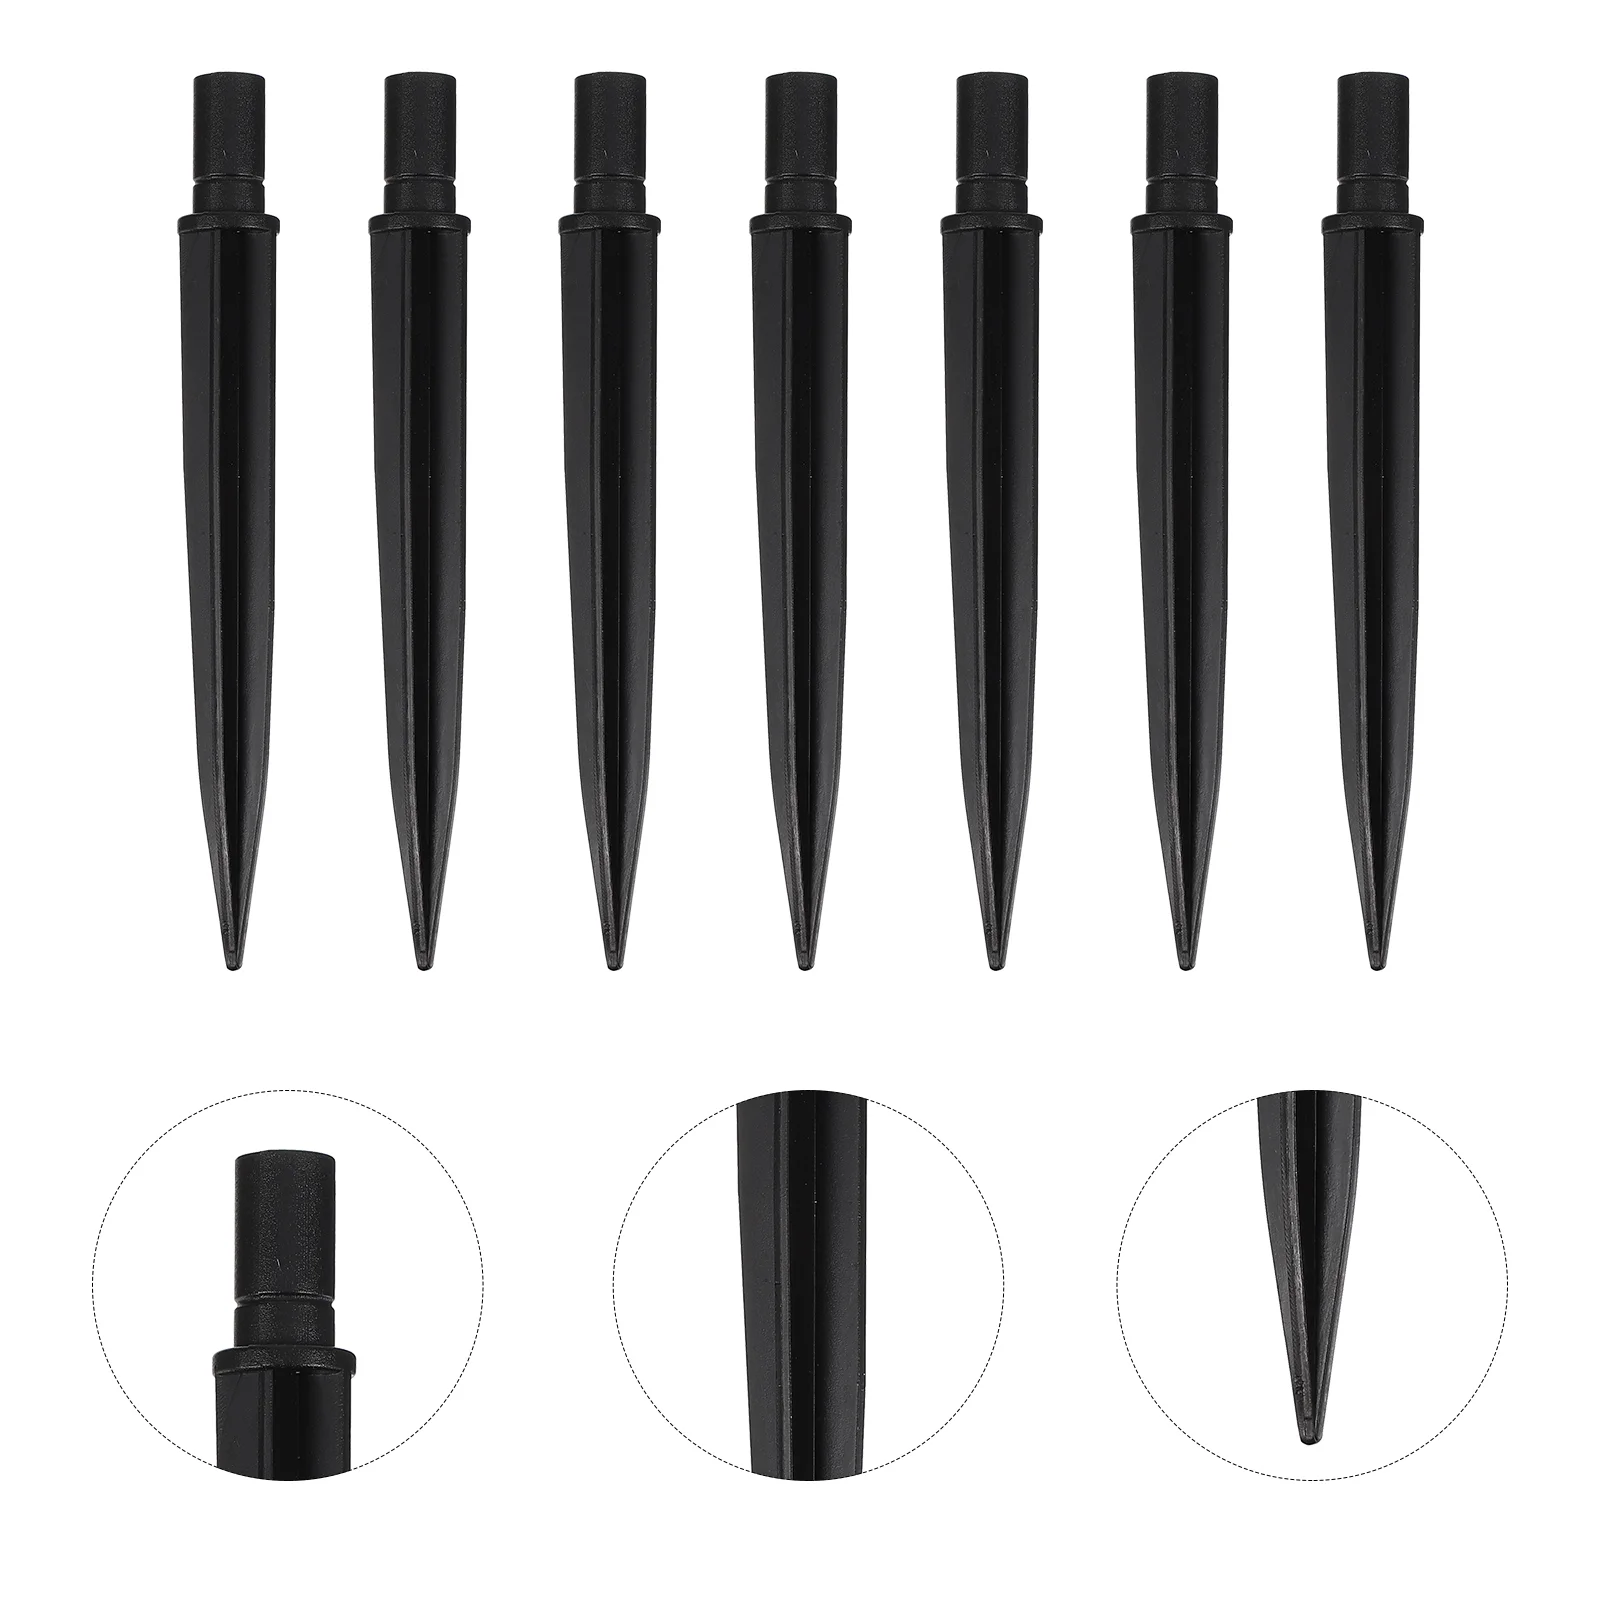 

20 Pcs Plastic Plug Light Patio Lawn Lamp Ground Spike Garden Lights Stakes Spikes Solar Flame Torch Replacement Tool